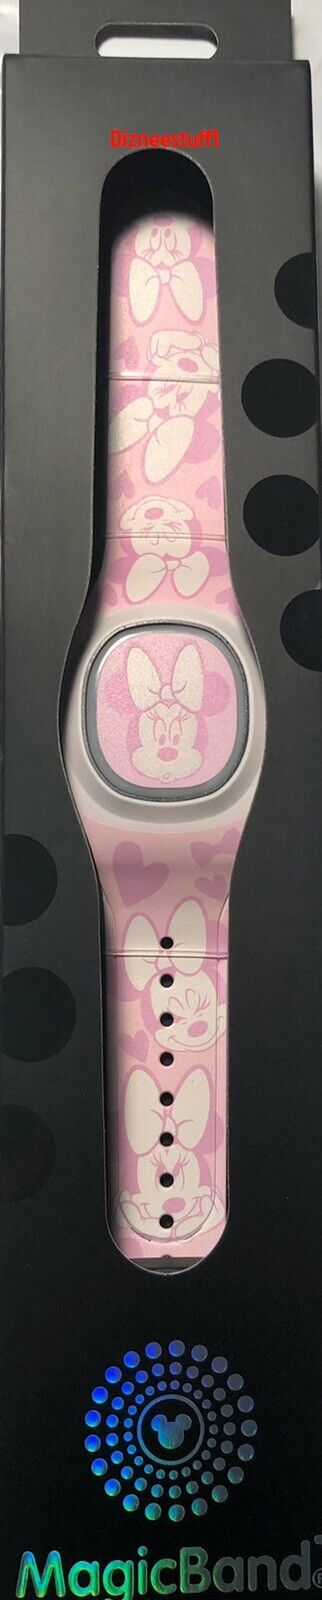 2022 Disney Parks MagicBand+ MagicBand Plus Minnie Mouse Faces Pink & White New